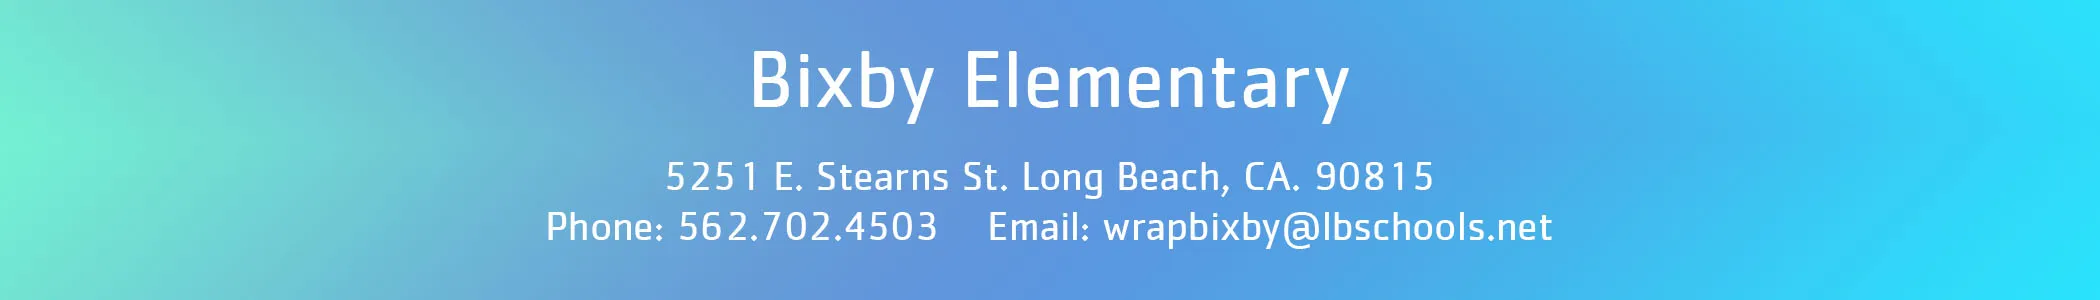 bixby banner with site information